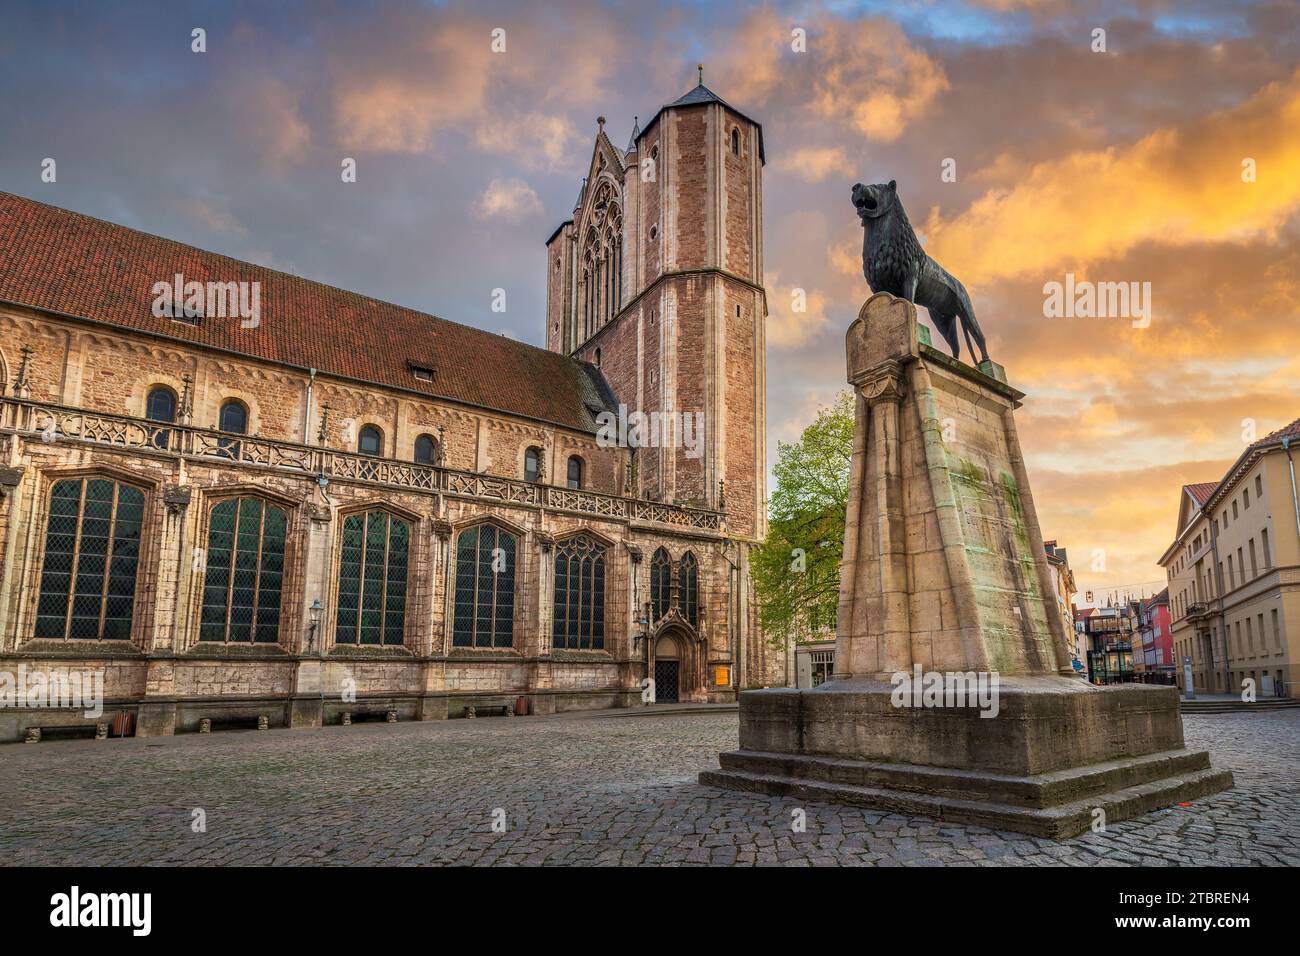 Statue of Lion and Cathedral in Braunschweig, Germany Stock Photo